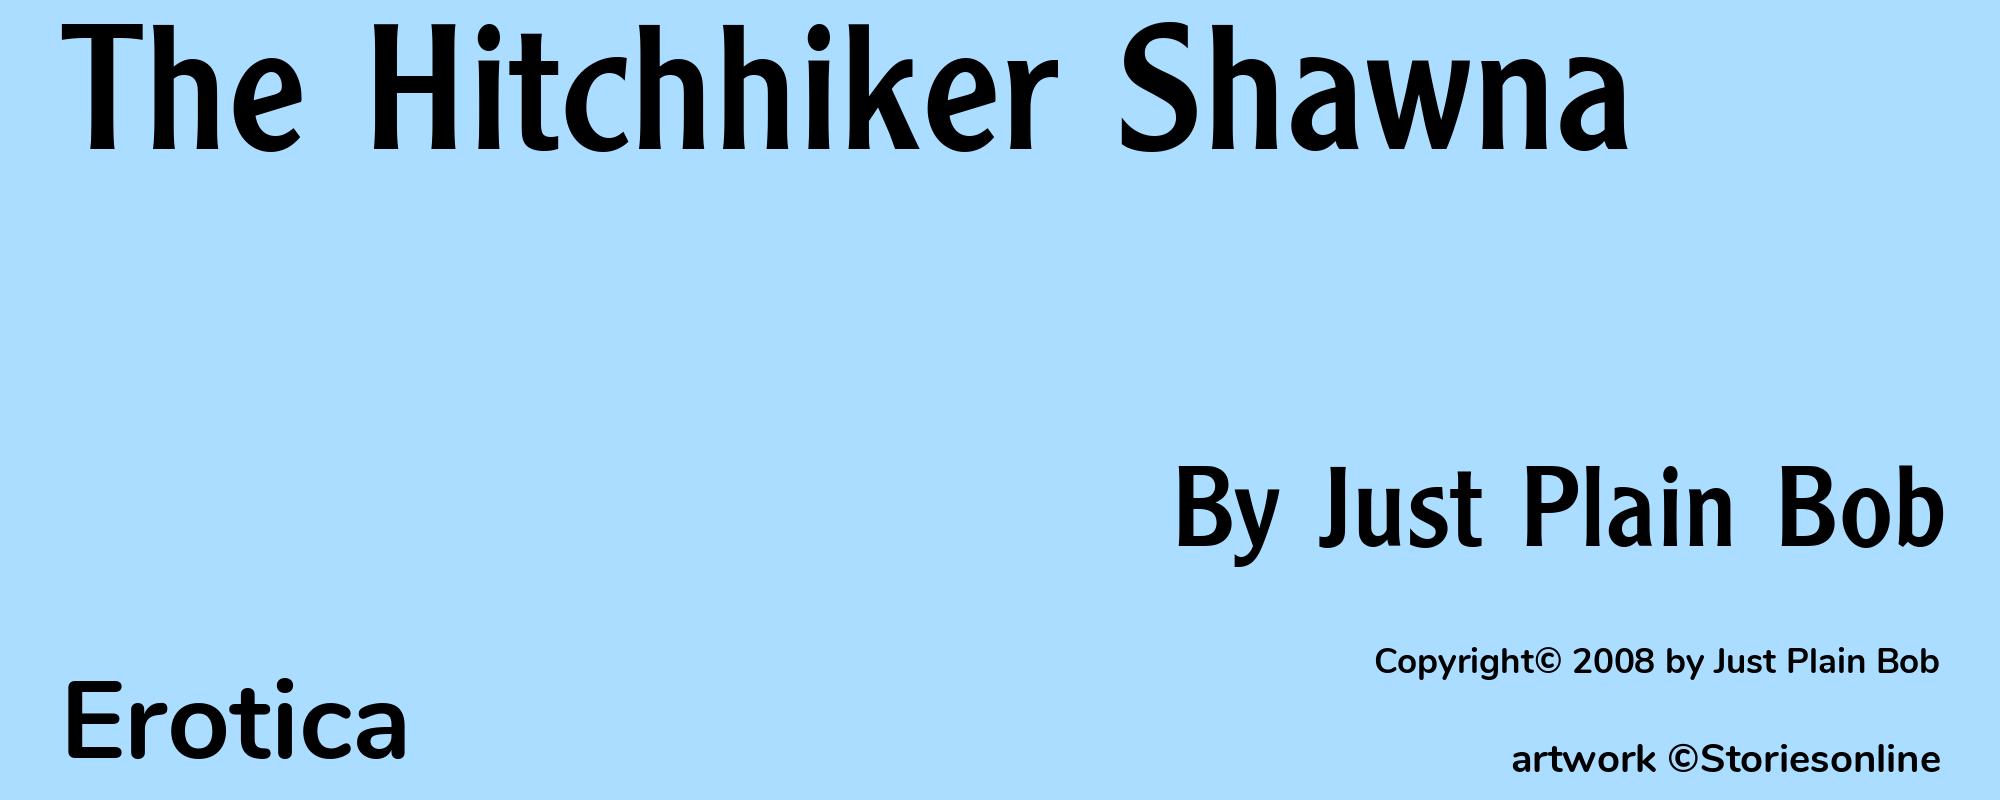 The Hitchhiker Shawna - Cover